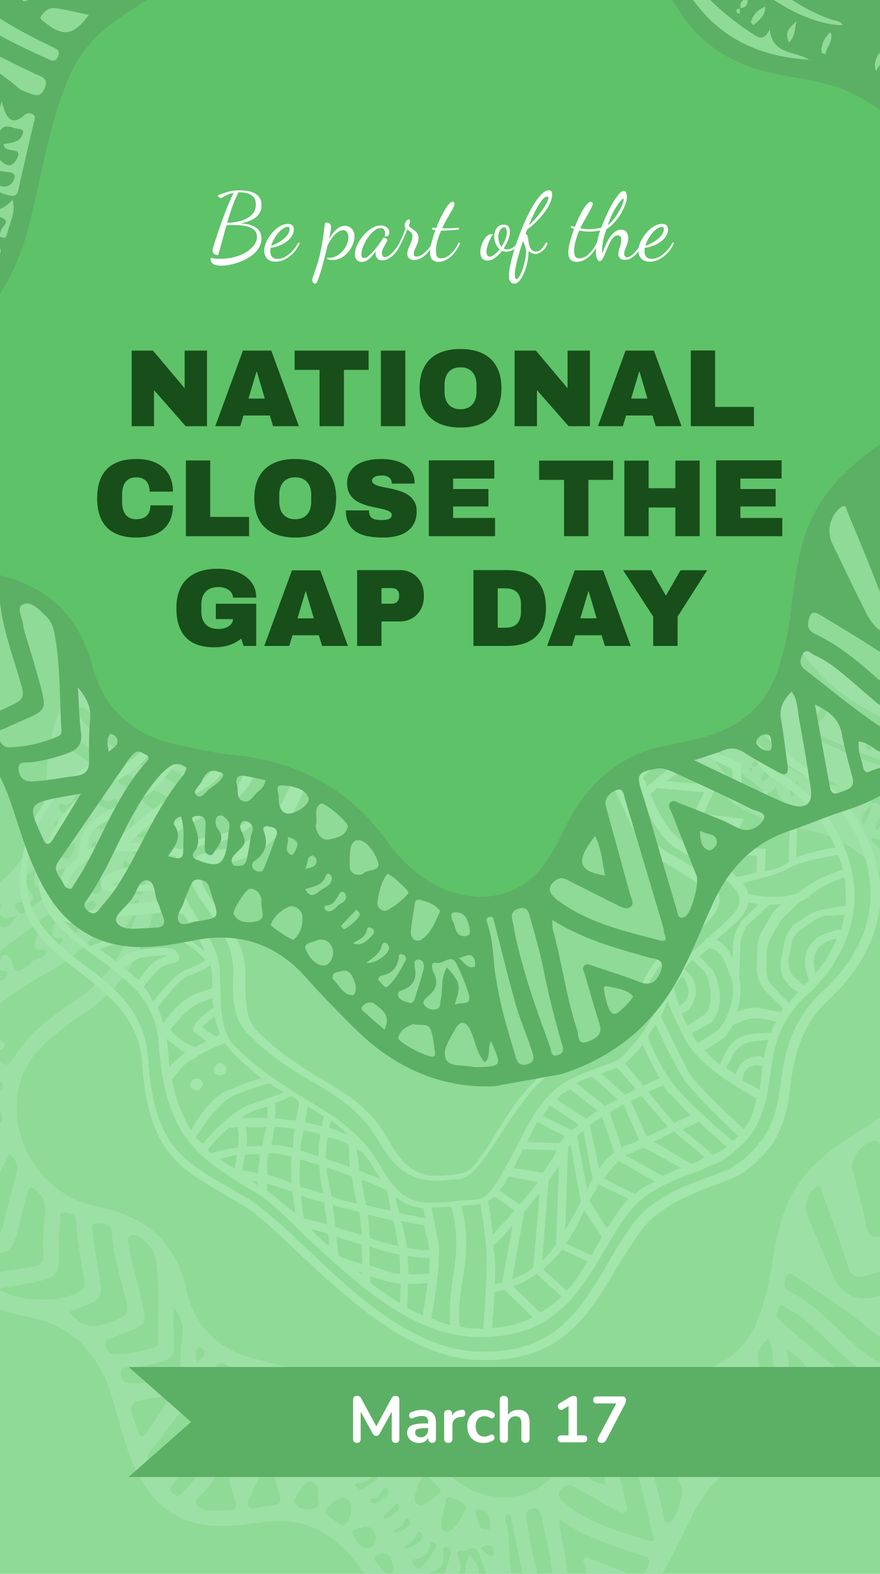 Free National Close the Gap Day Flyer Background in PDF, Illustrator, PSD, EPS, SVG, JPG, PNG